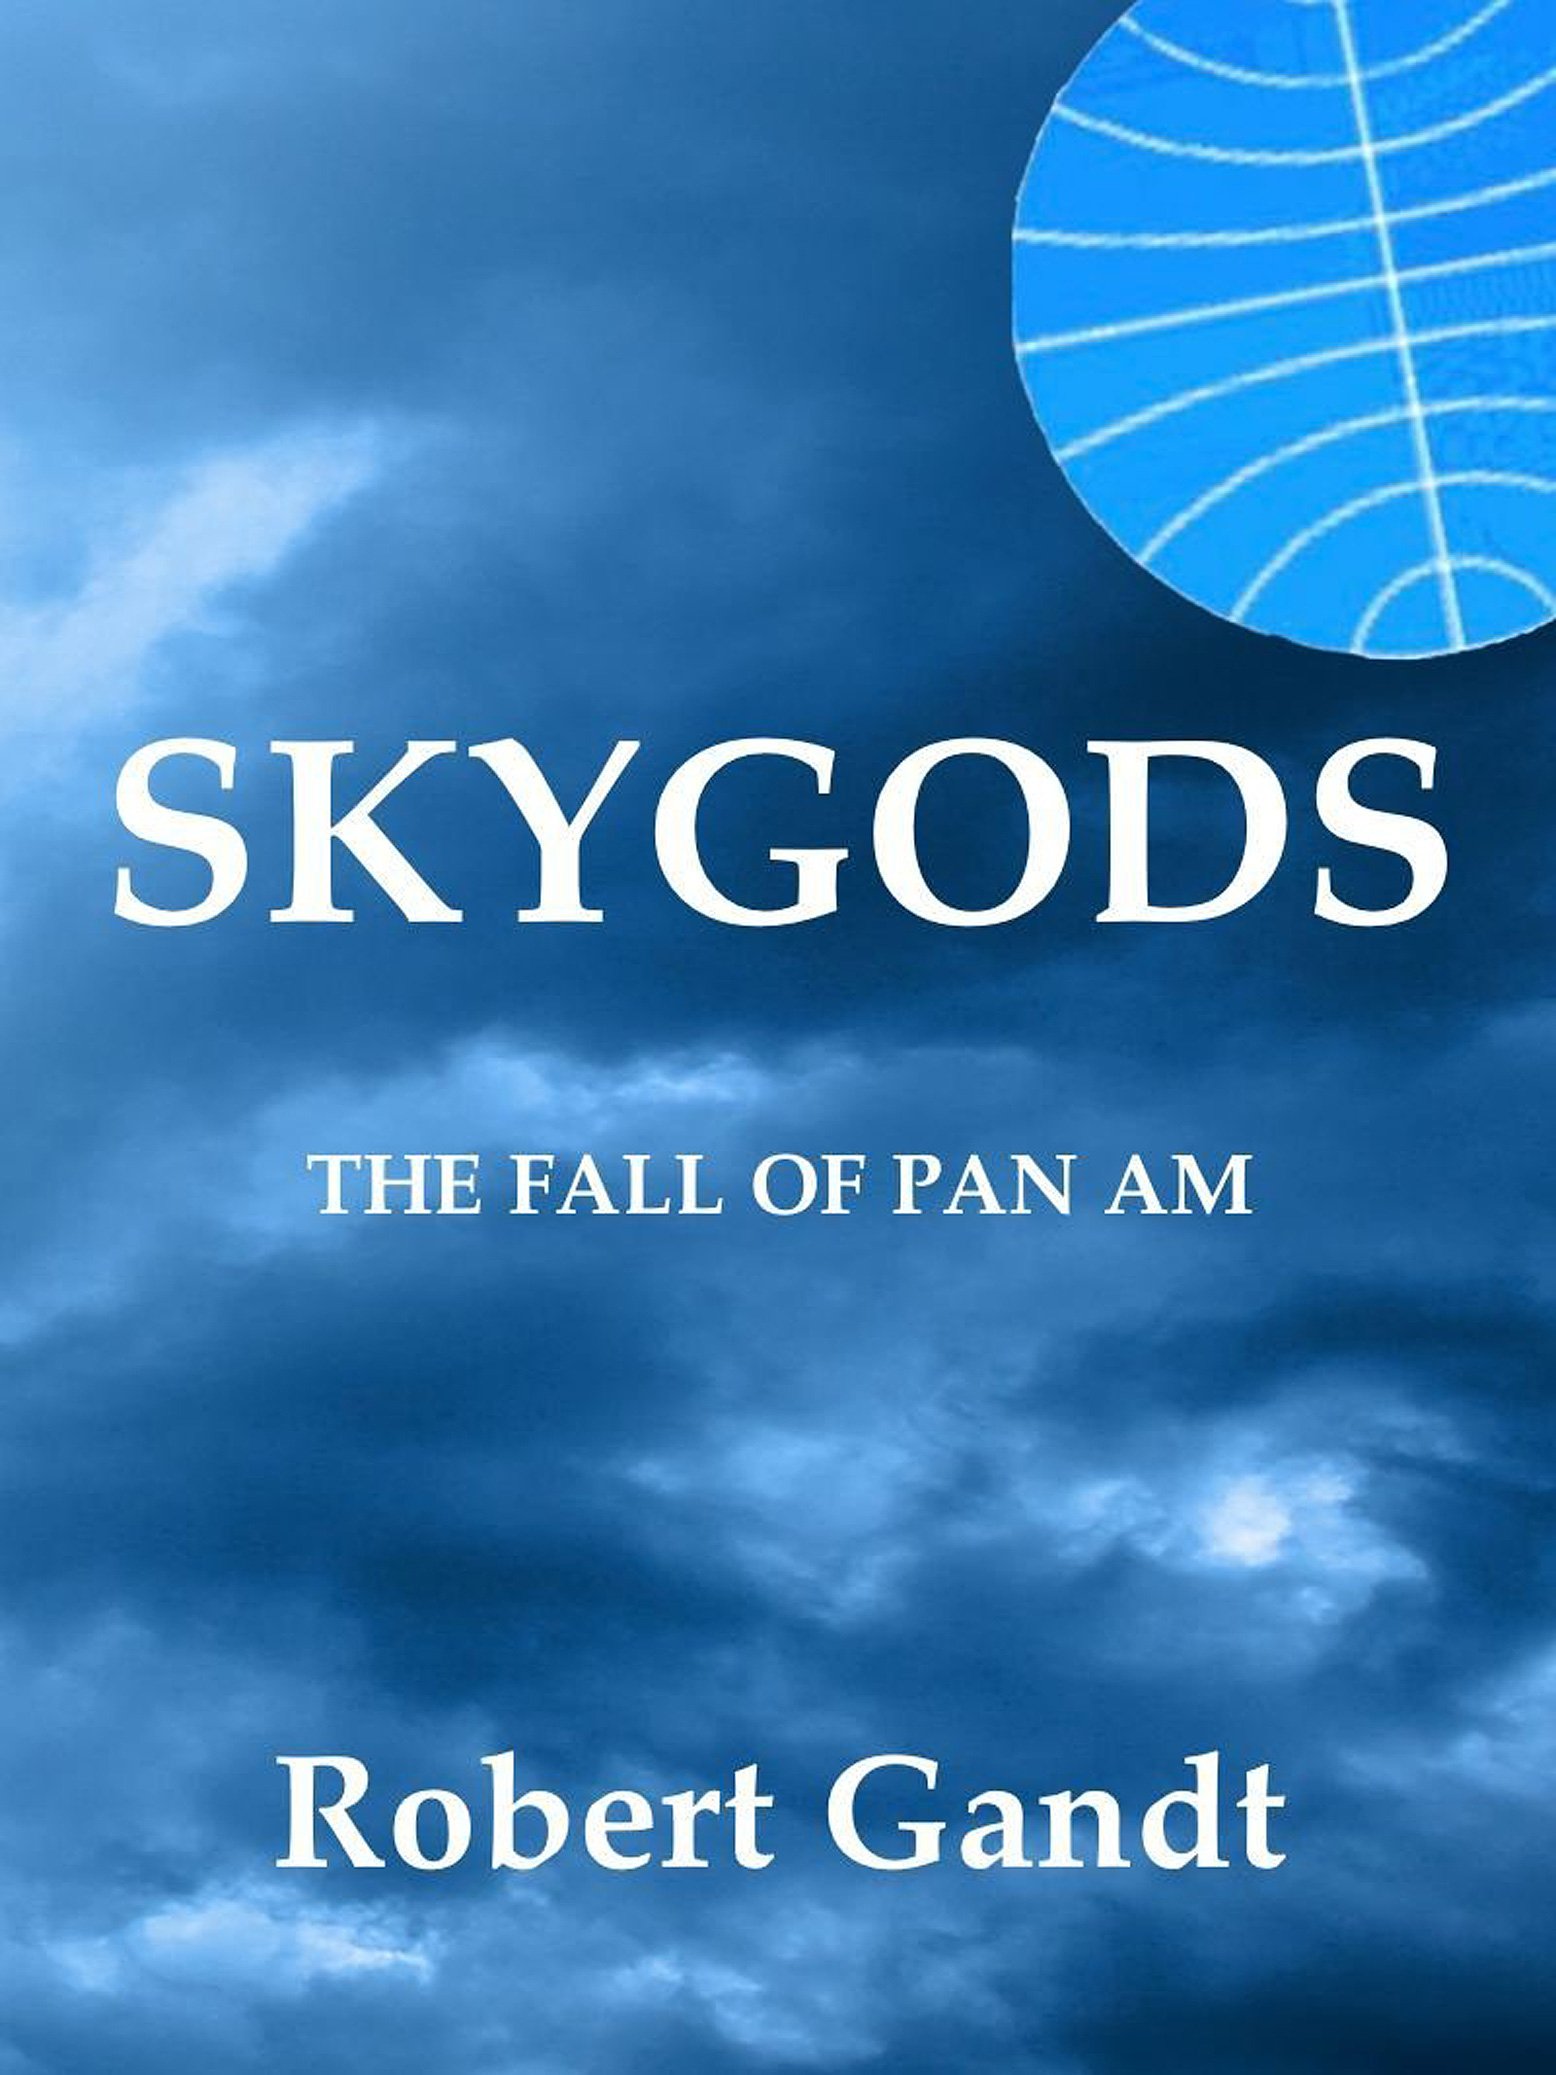 SkyGods: The Fall of Pan Am, by Robert Gandt (1995)